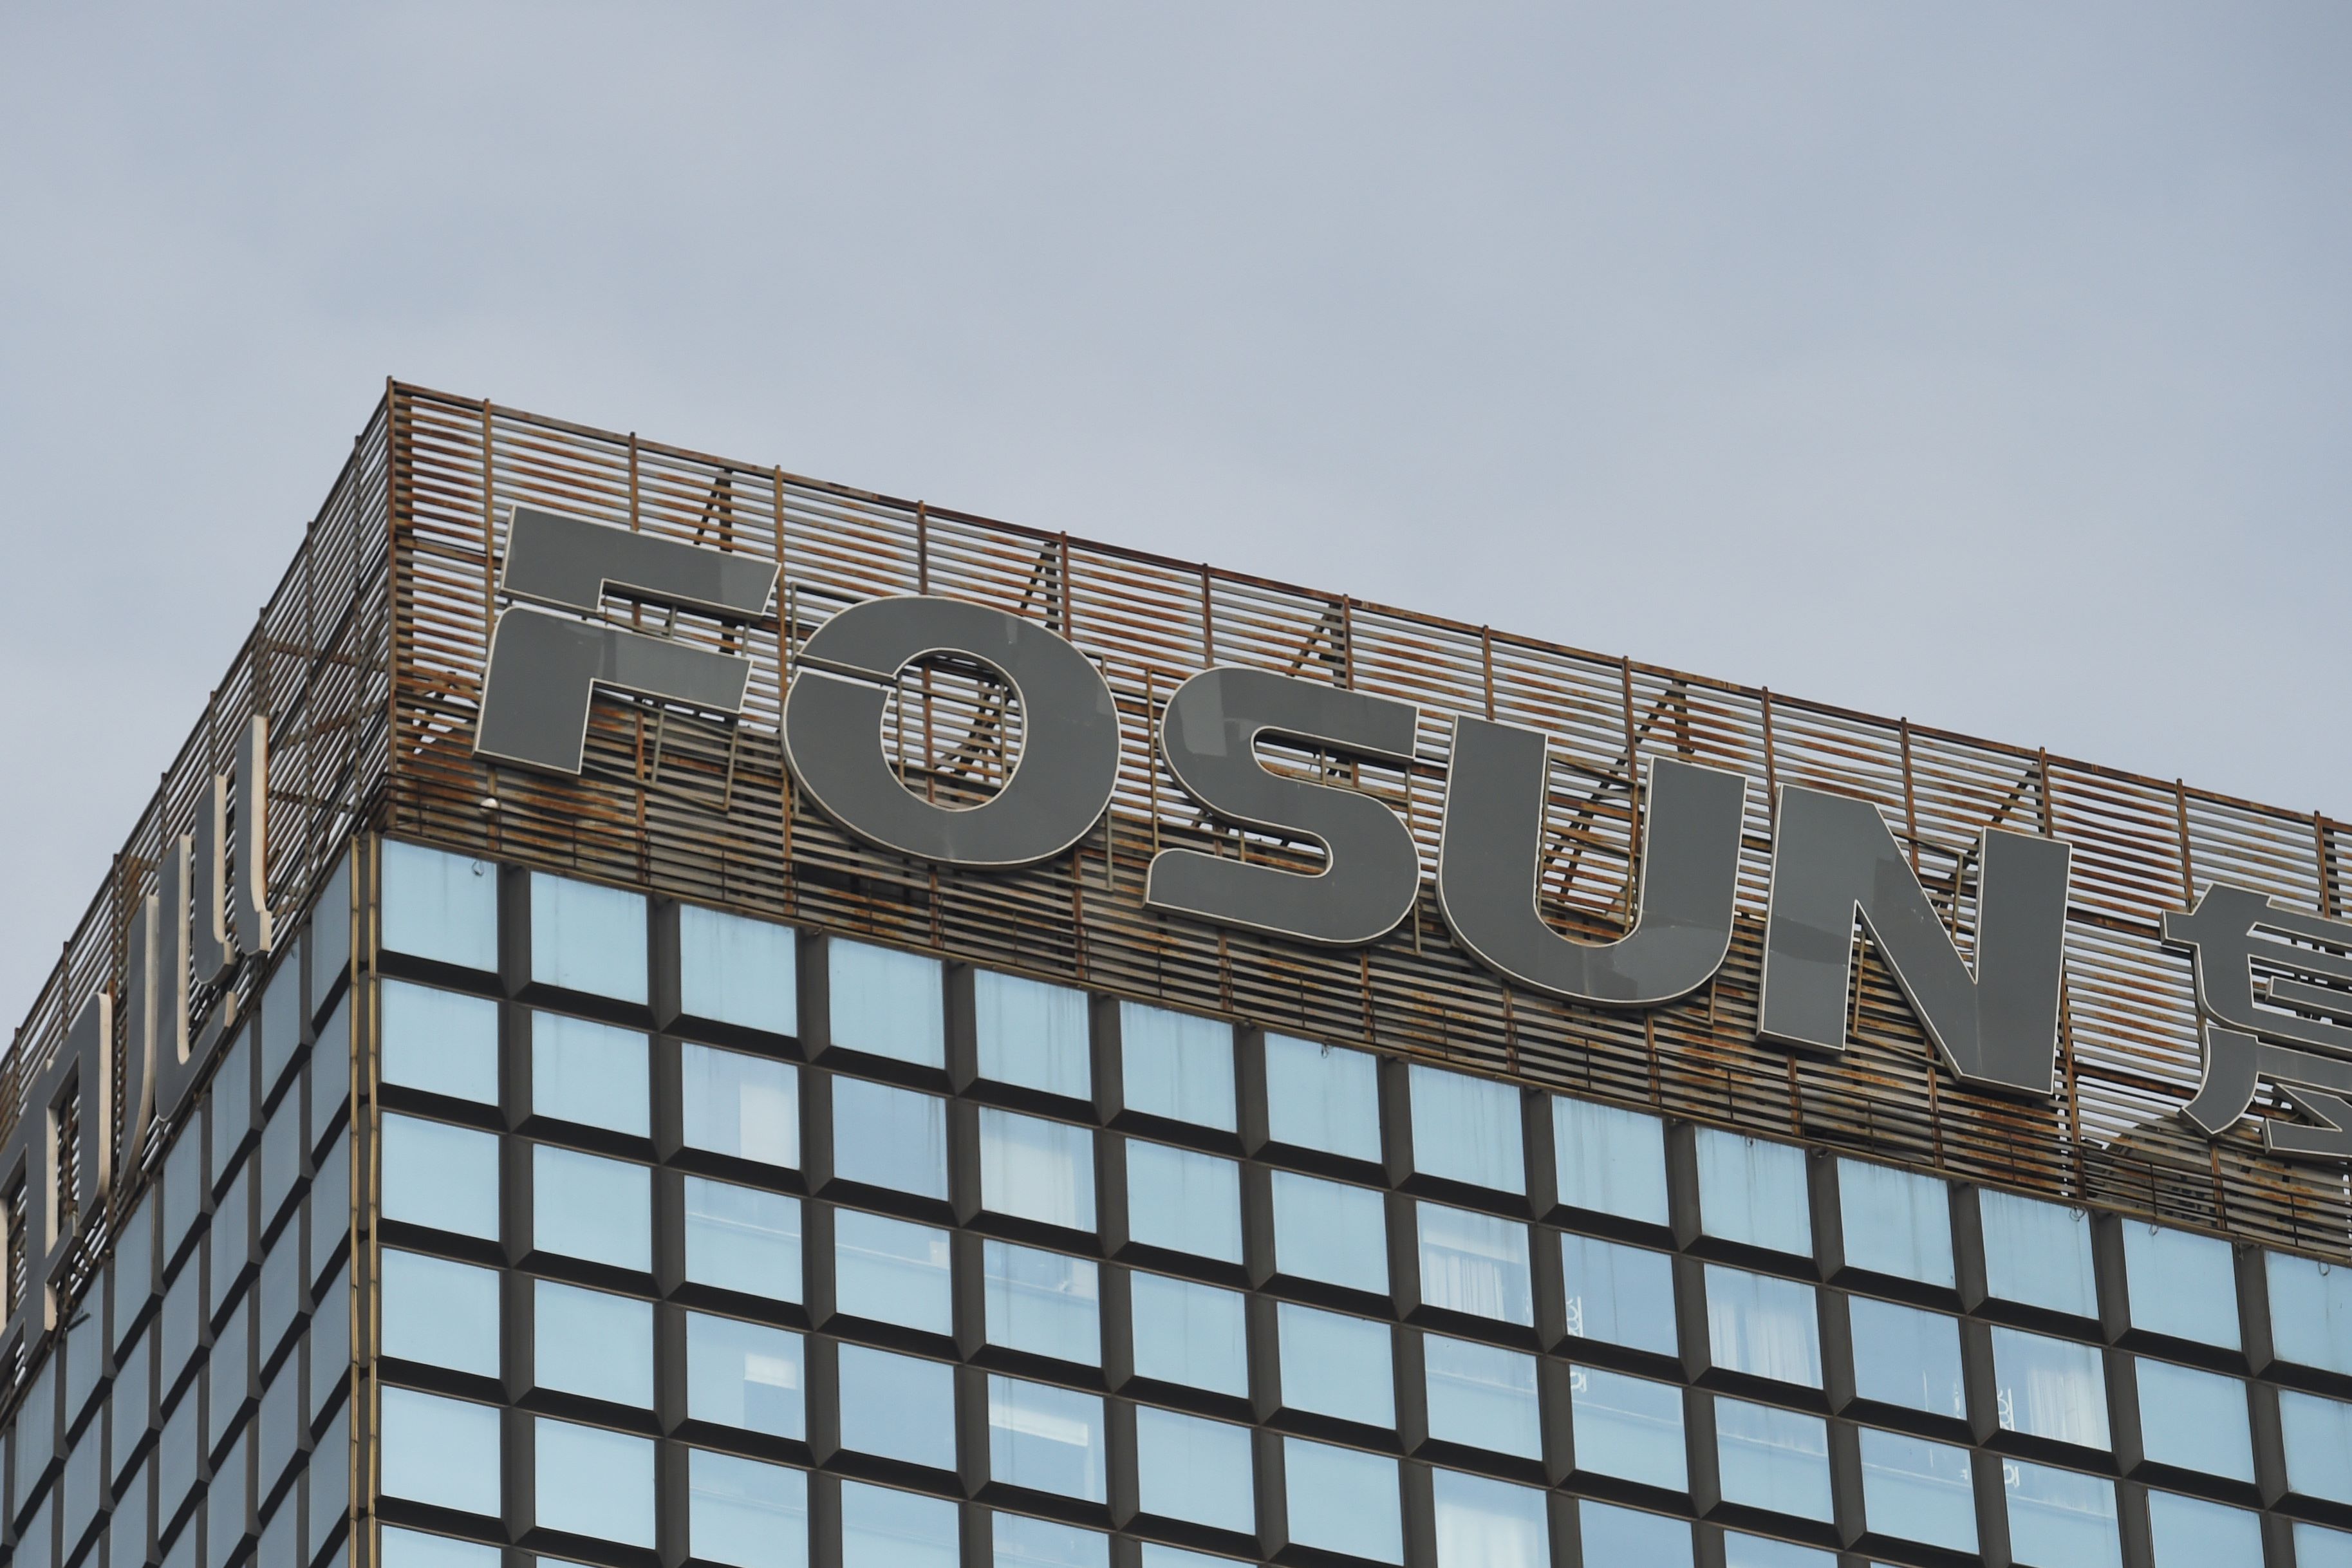 The logo of Chinese conglomerate Fosun is seen on top of a building in Beijing on December 12, 2015. One of China's biggest private-sector conglomerates, Club Med owner Fosun, said on December 11 its chairman was cooperating with judicial authorities over a reported corruption investigation. Shares in the group were suspended in Hong Kong after the disappearance of Guo Guangchang, dubbed "China's Warren Buffett", Fosun said in a statement. AFP PHOTO / GREG BAKER